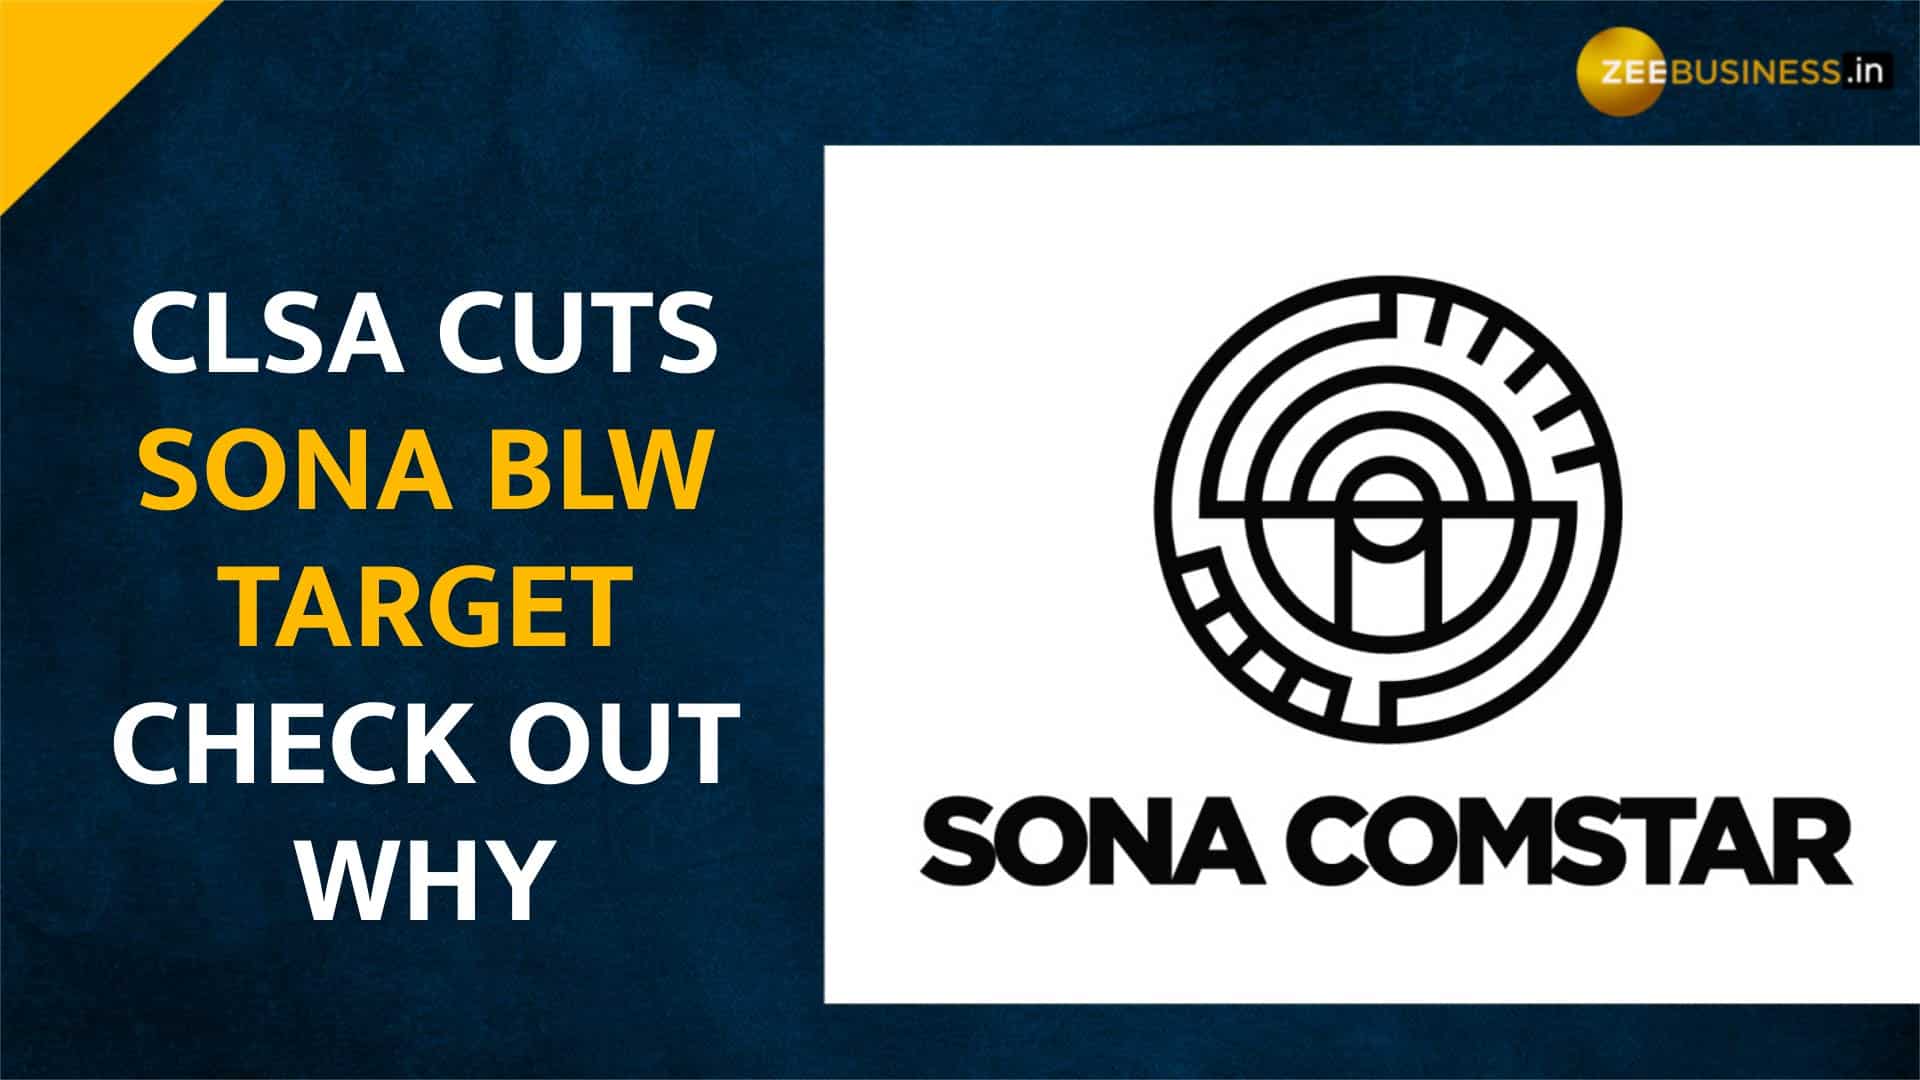 Sona BLW gains over 6 Here’s why auto ancillary firm’s shares zoomed